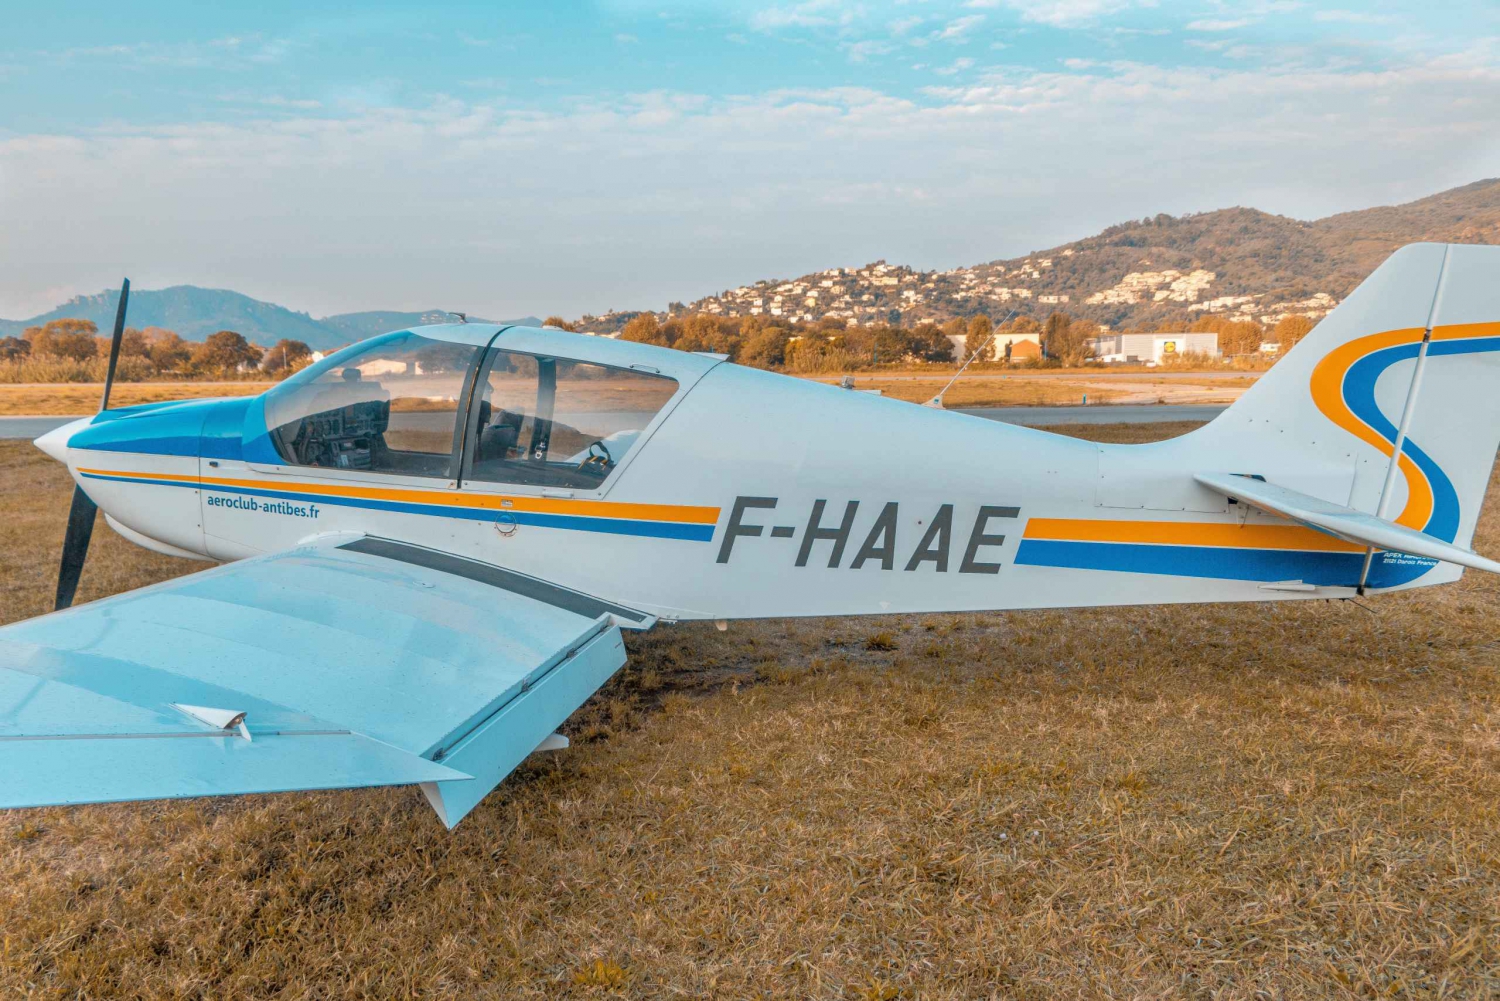 Cannes: French Riviera Discovery Flight